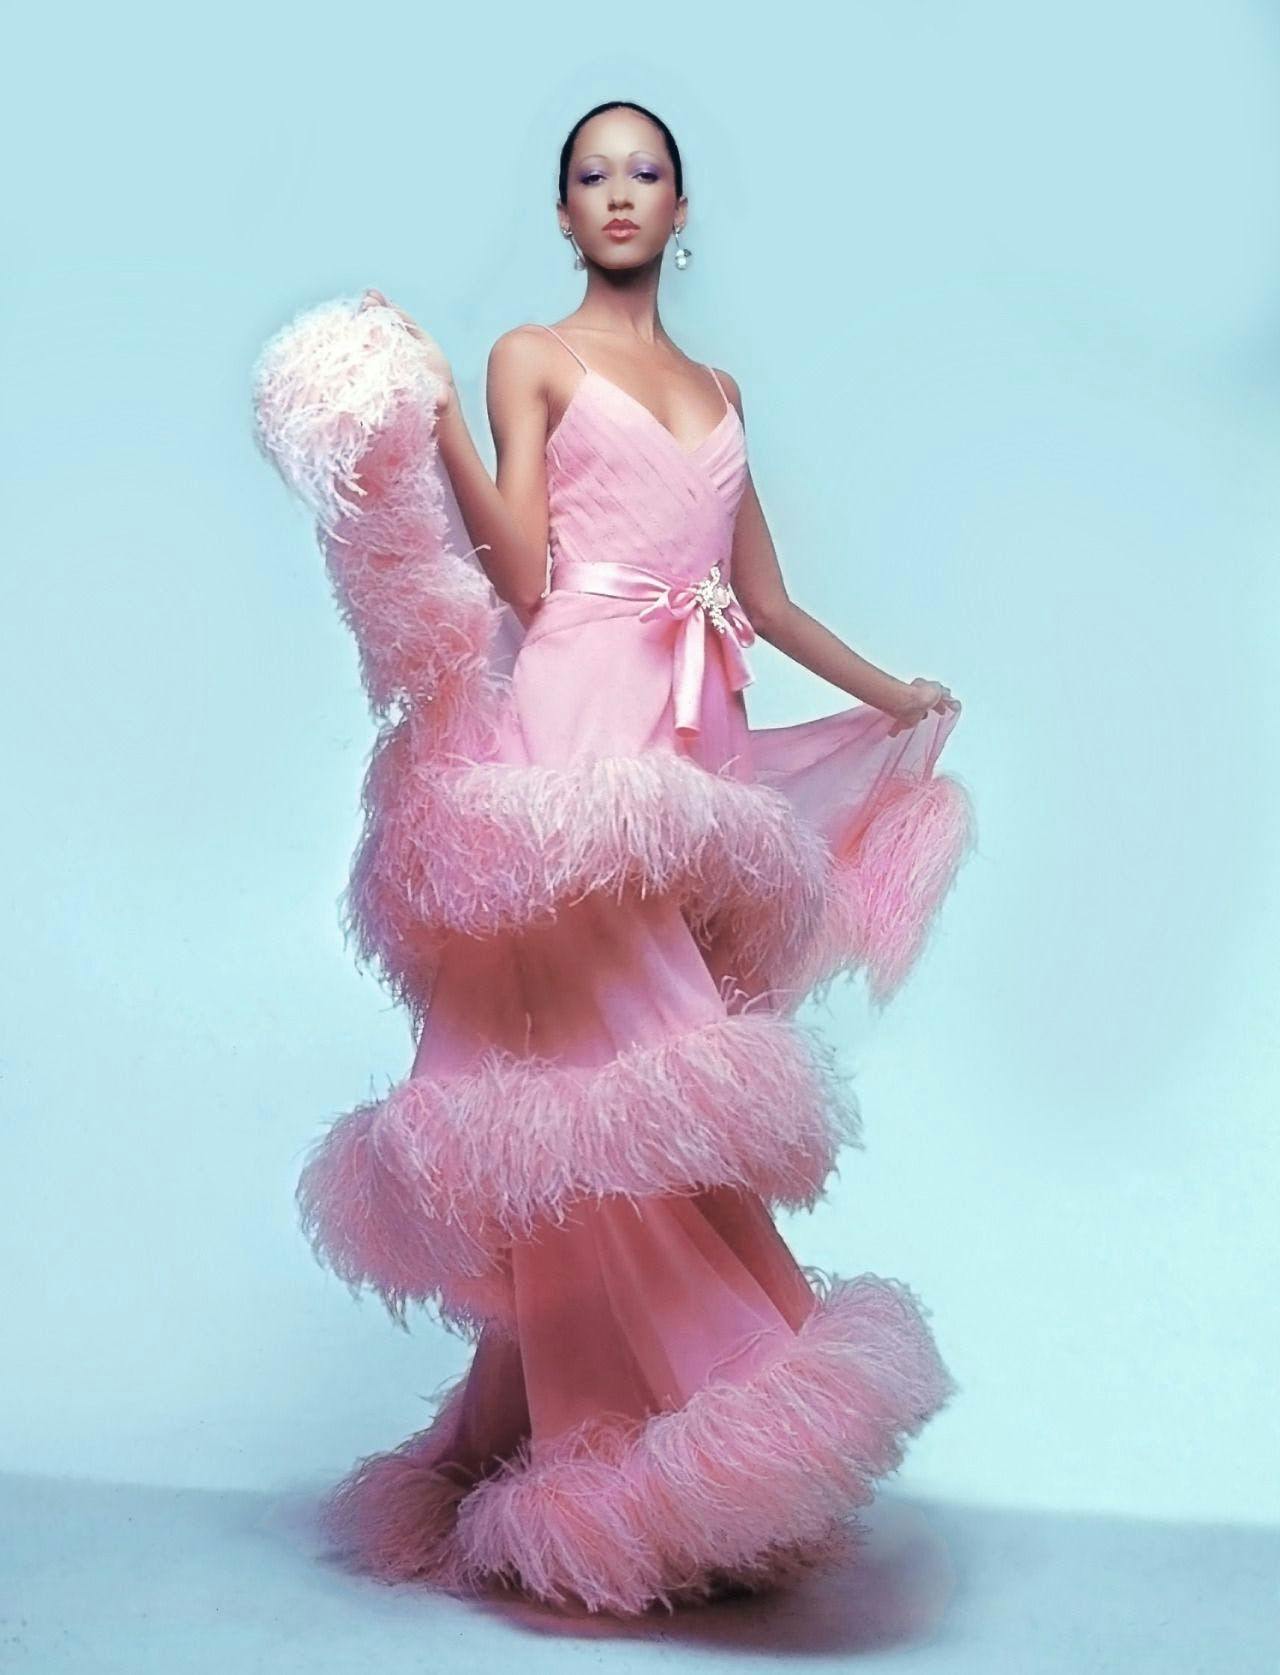 pat cleveland in a pink fringe maxi gown